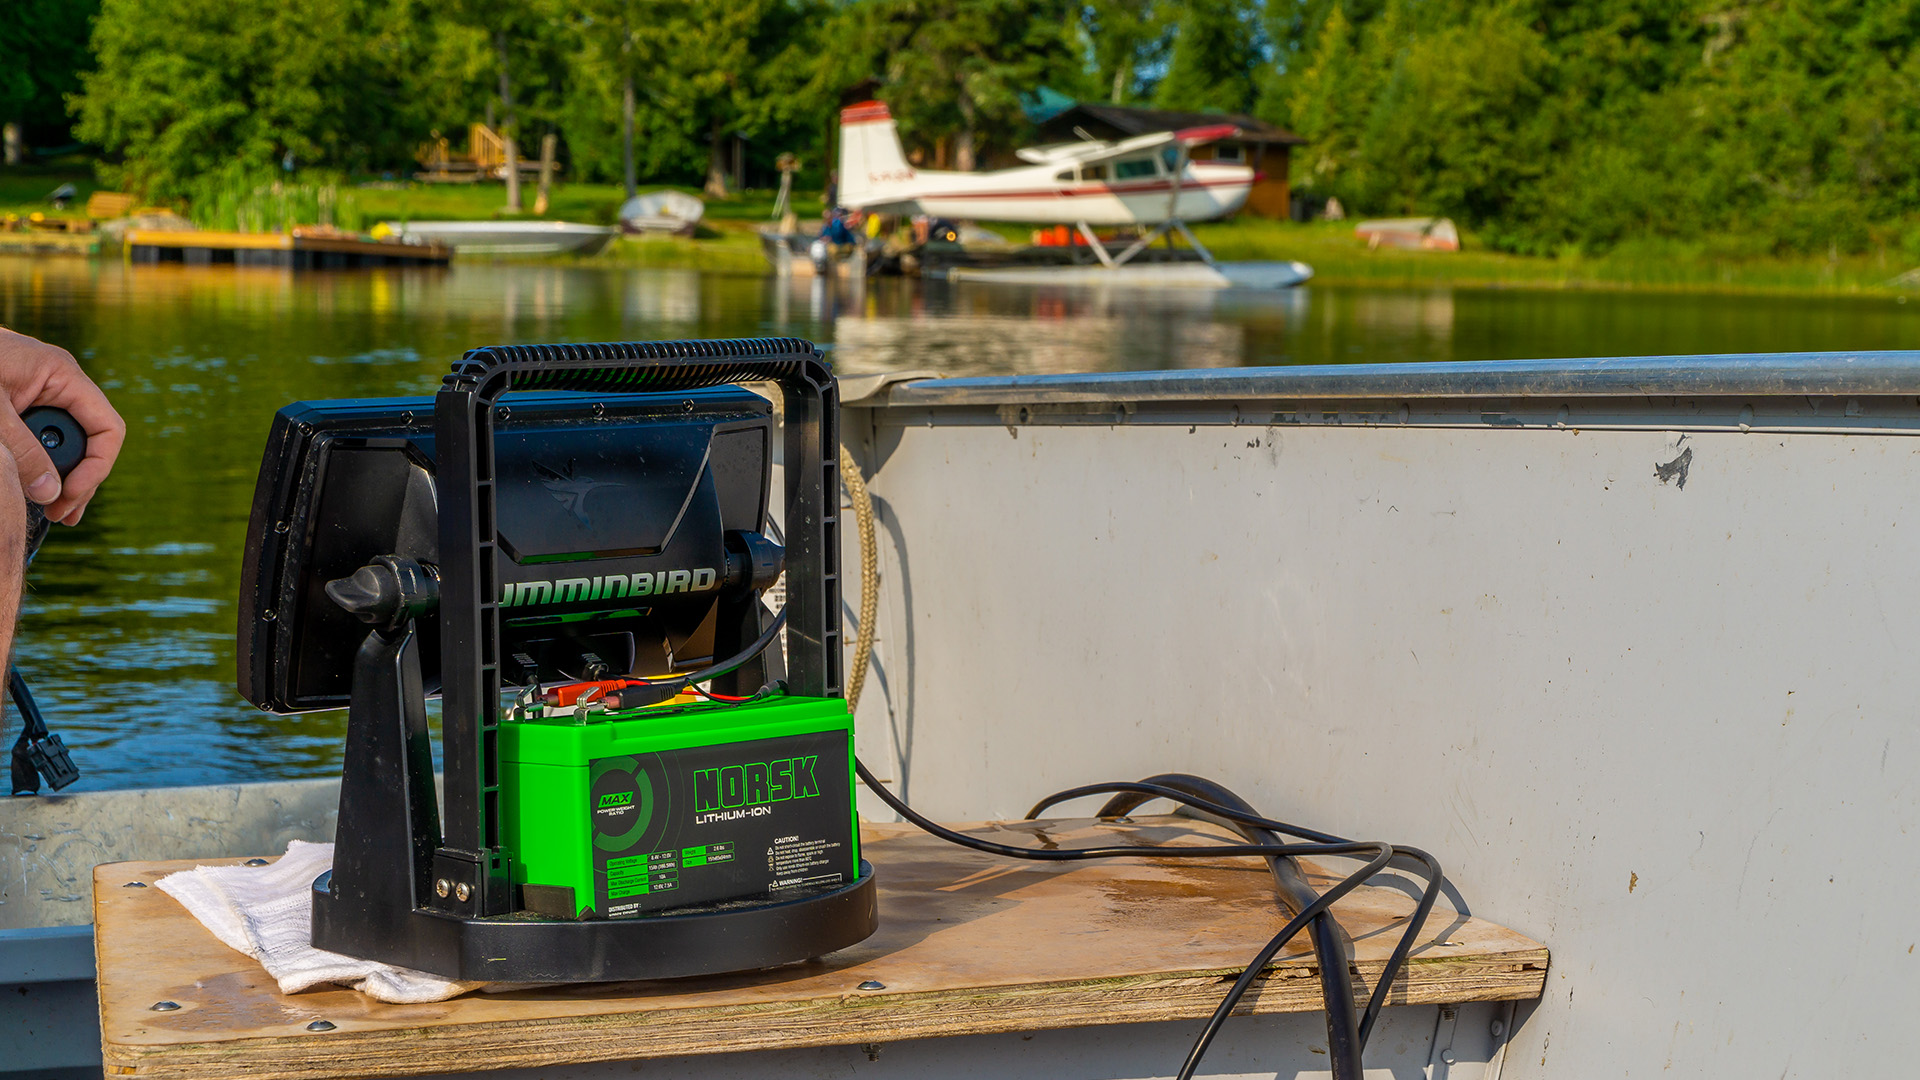 Norsk Lithium 15Ah Lithium Ion Battery pwoeing a Helix on a Fishing Trip in Canada 2